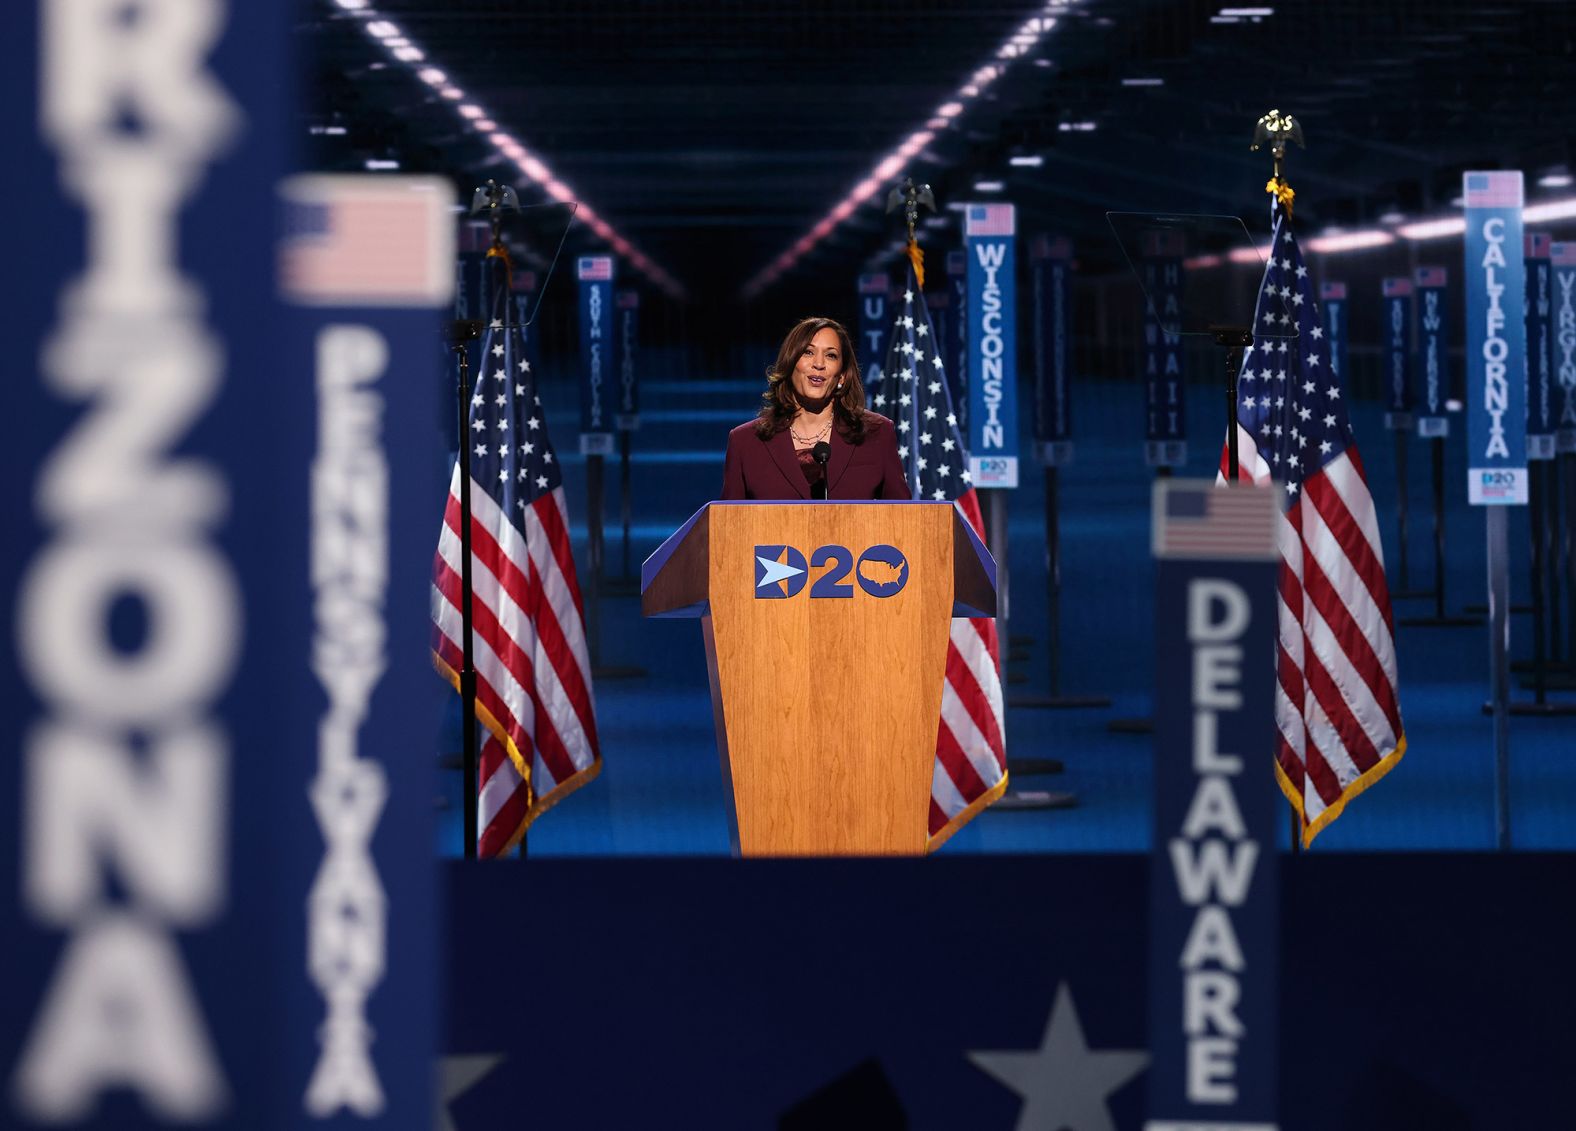 Harris delivers a speech as she formally accepts the nomination at the <a href="index.php?page=&url=http%3A%2F%2Fwww.cnn.com%2F2020%2F08%2F20%2Fpolitics%2Fgallery%2Fdemocratic-convention-2020%2Findex.html" target="_blank">Democratic National Convention.</a> "Let's fight with conviction," Harris said in her speech. "Let's fight with hope. Let's fight with confidence in ourselves and a commitment to each other. To the America we know is possible. The America we love."